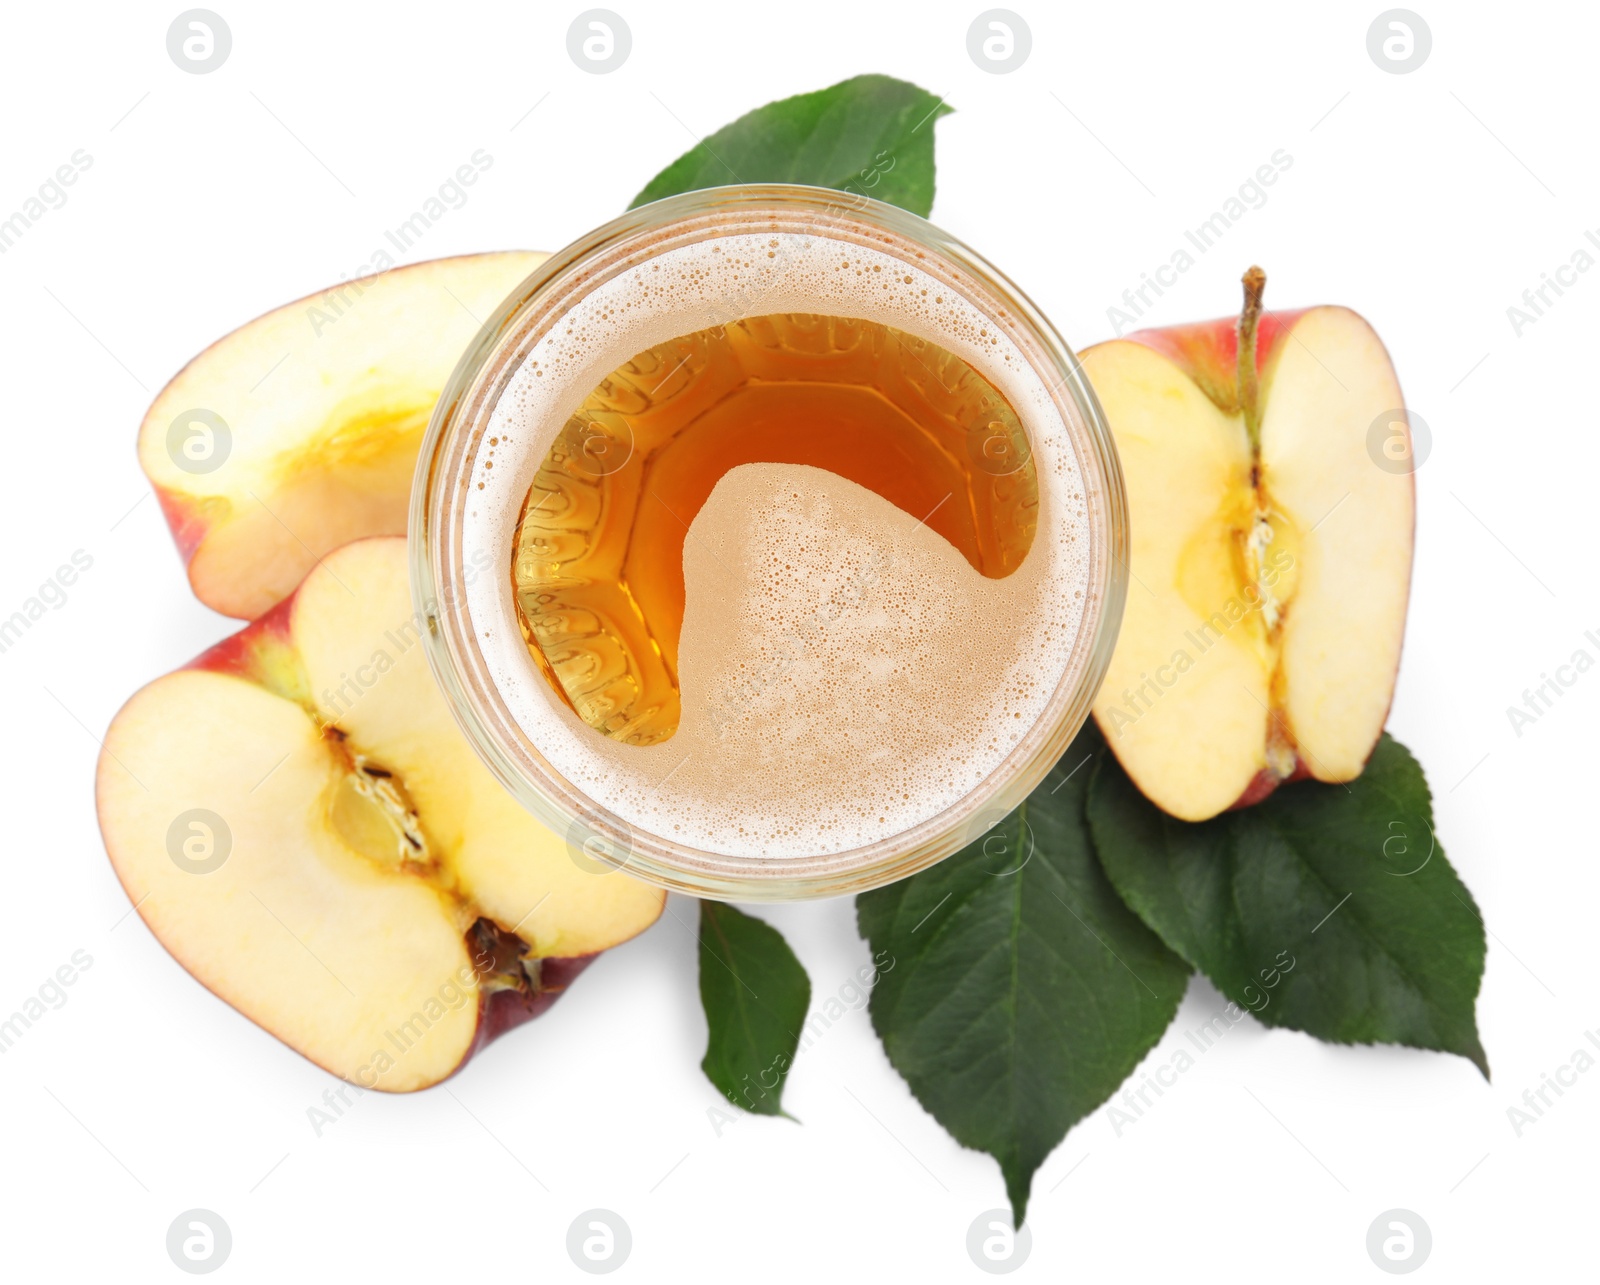 Photo of Delicious cider in glass near pieces of ripe apple on white background, top view